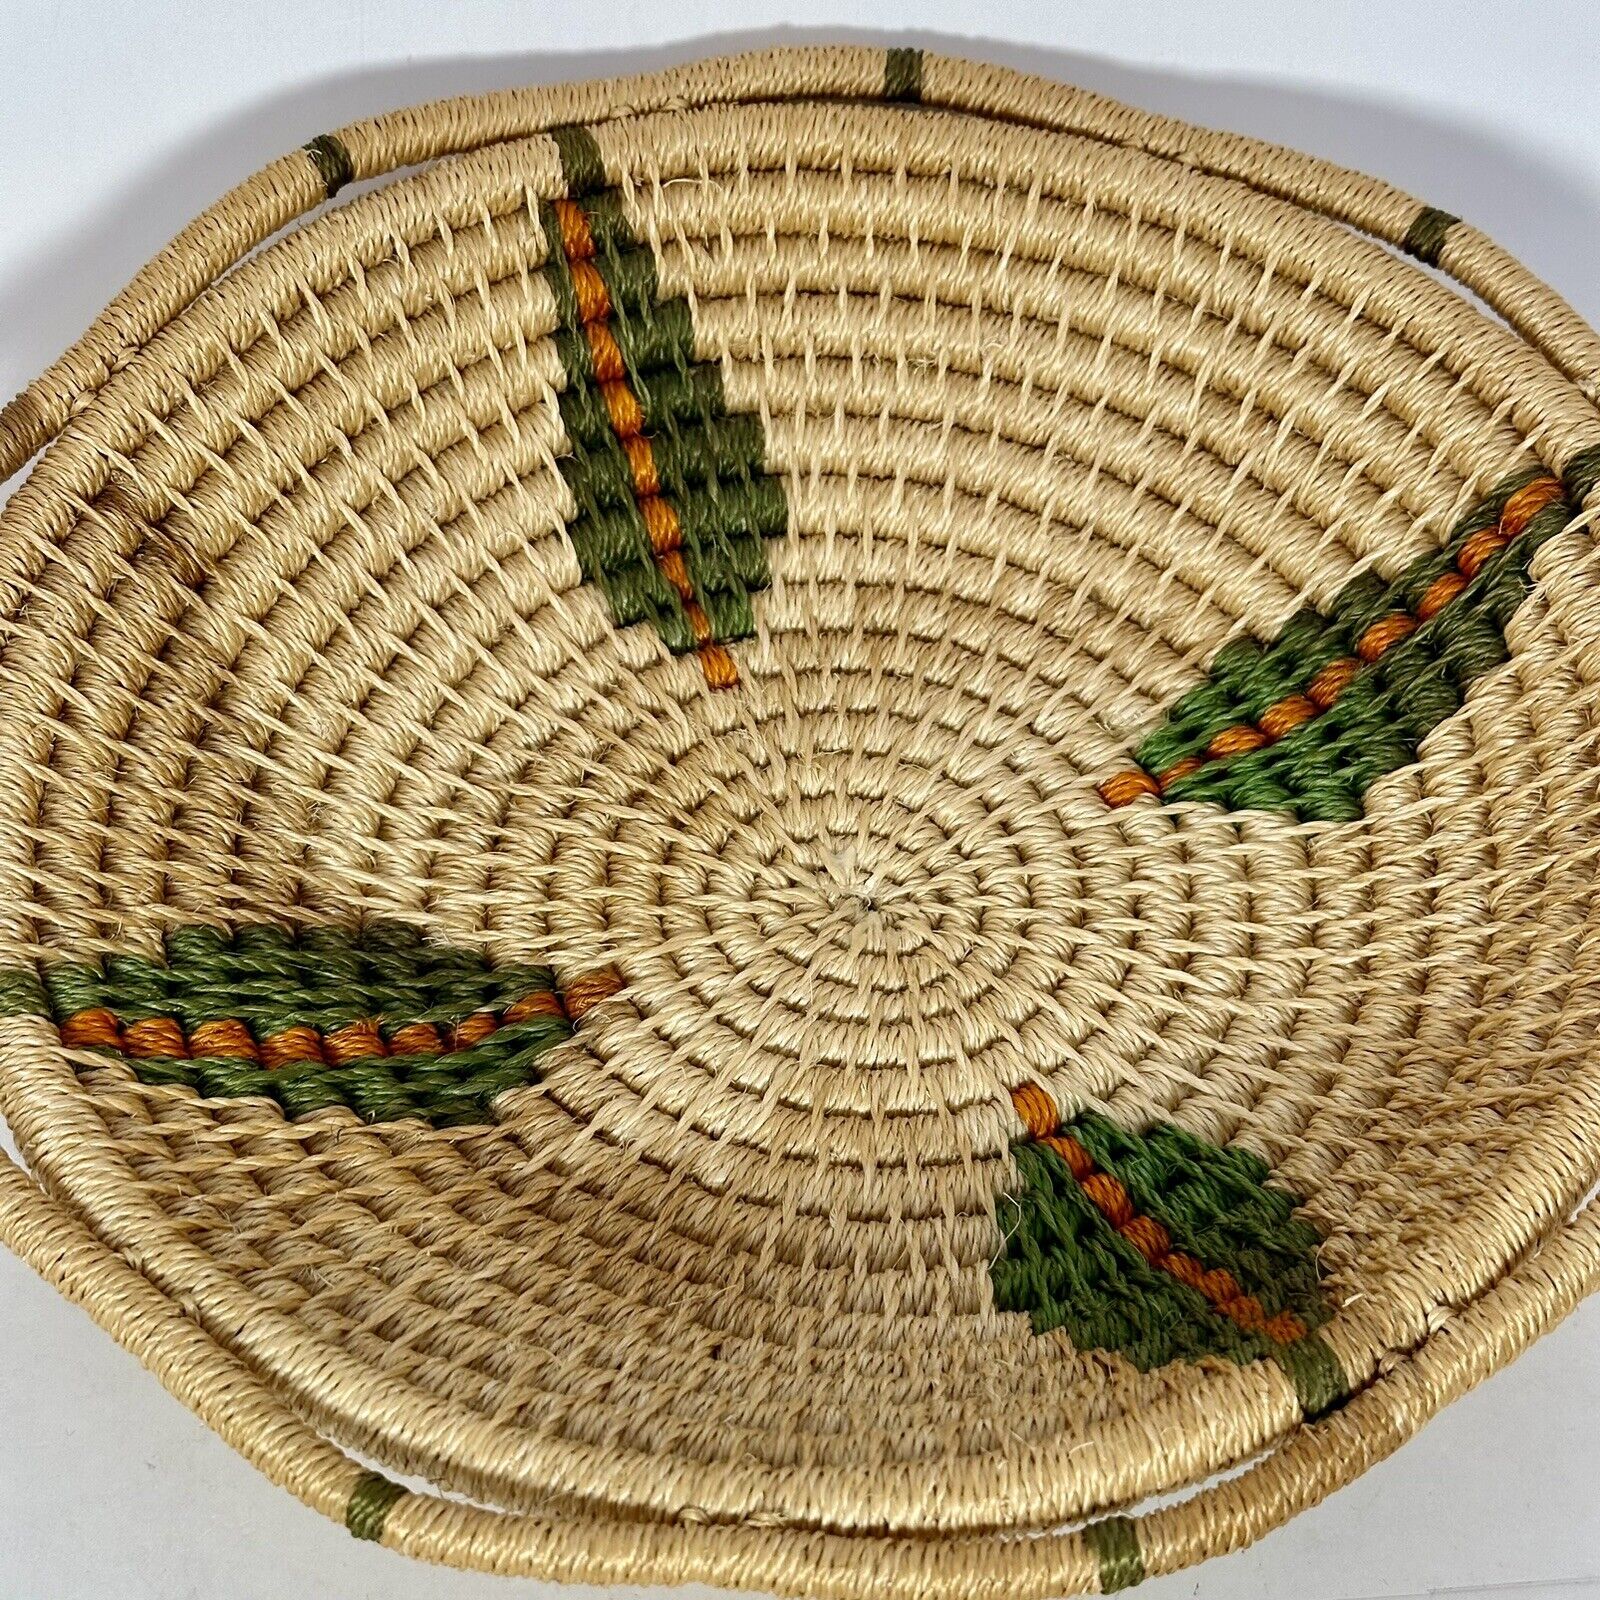 Vintage Hand Woven Coiled Basket 12” Diameter To Use Or Hang As Decor